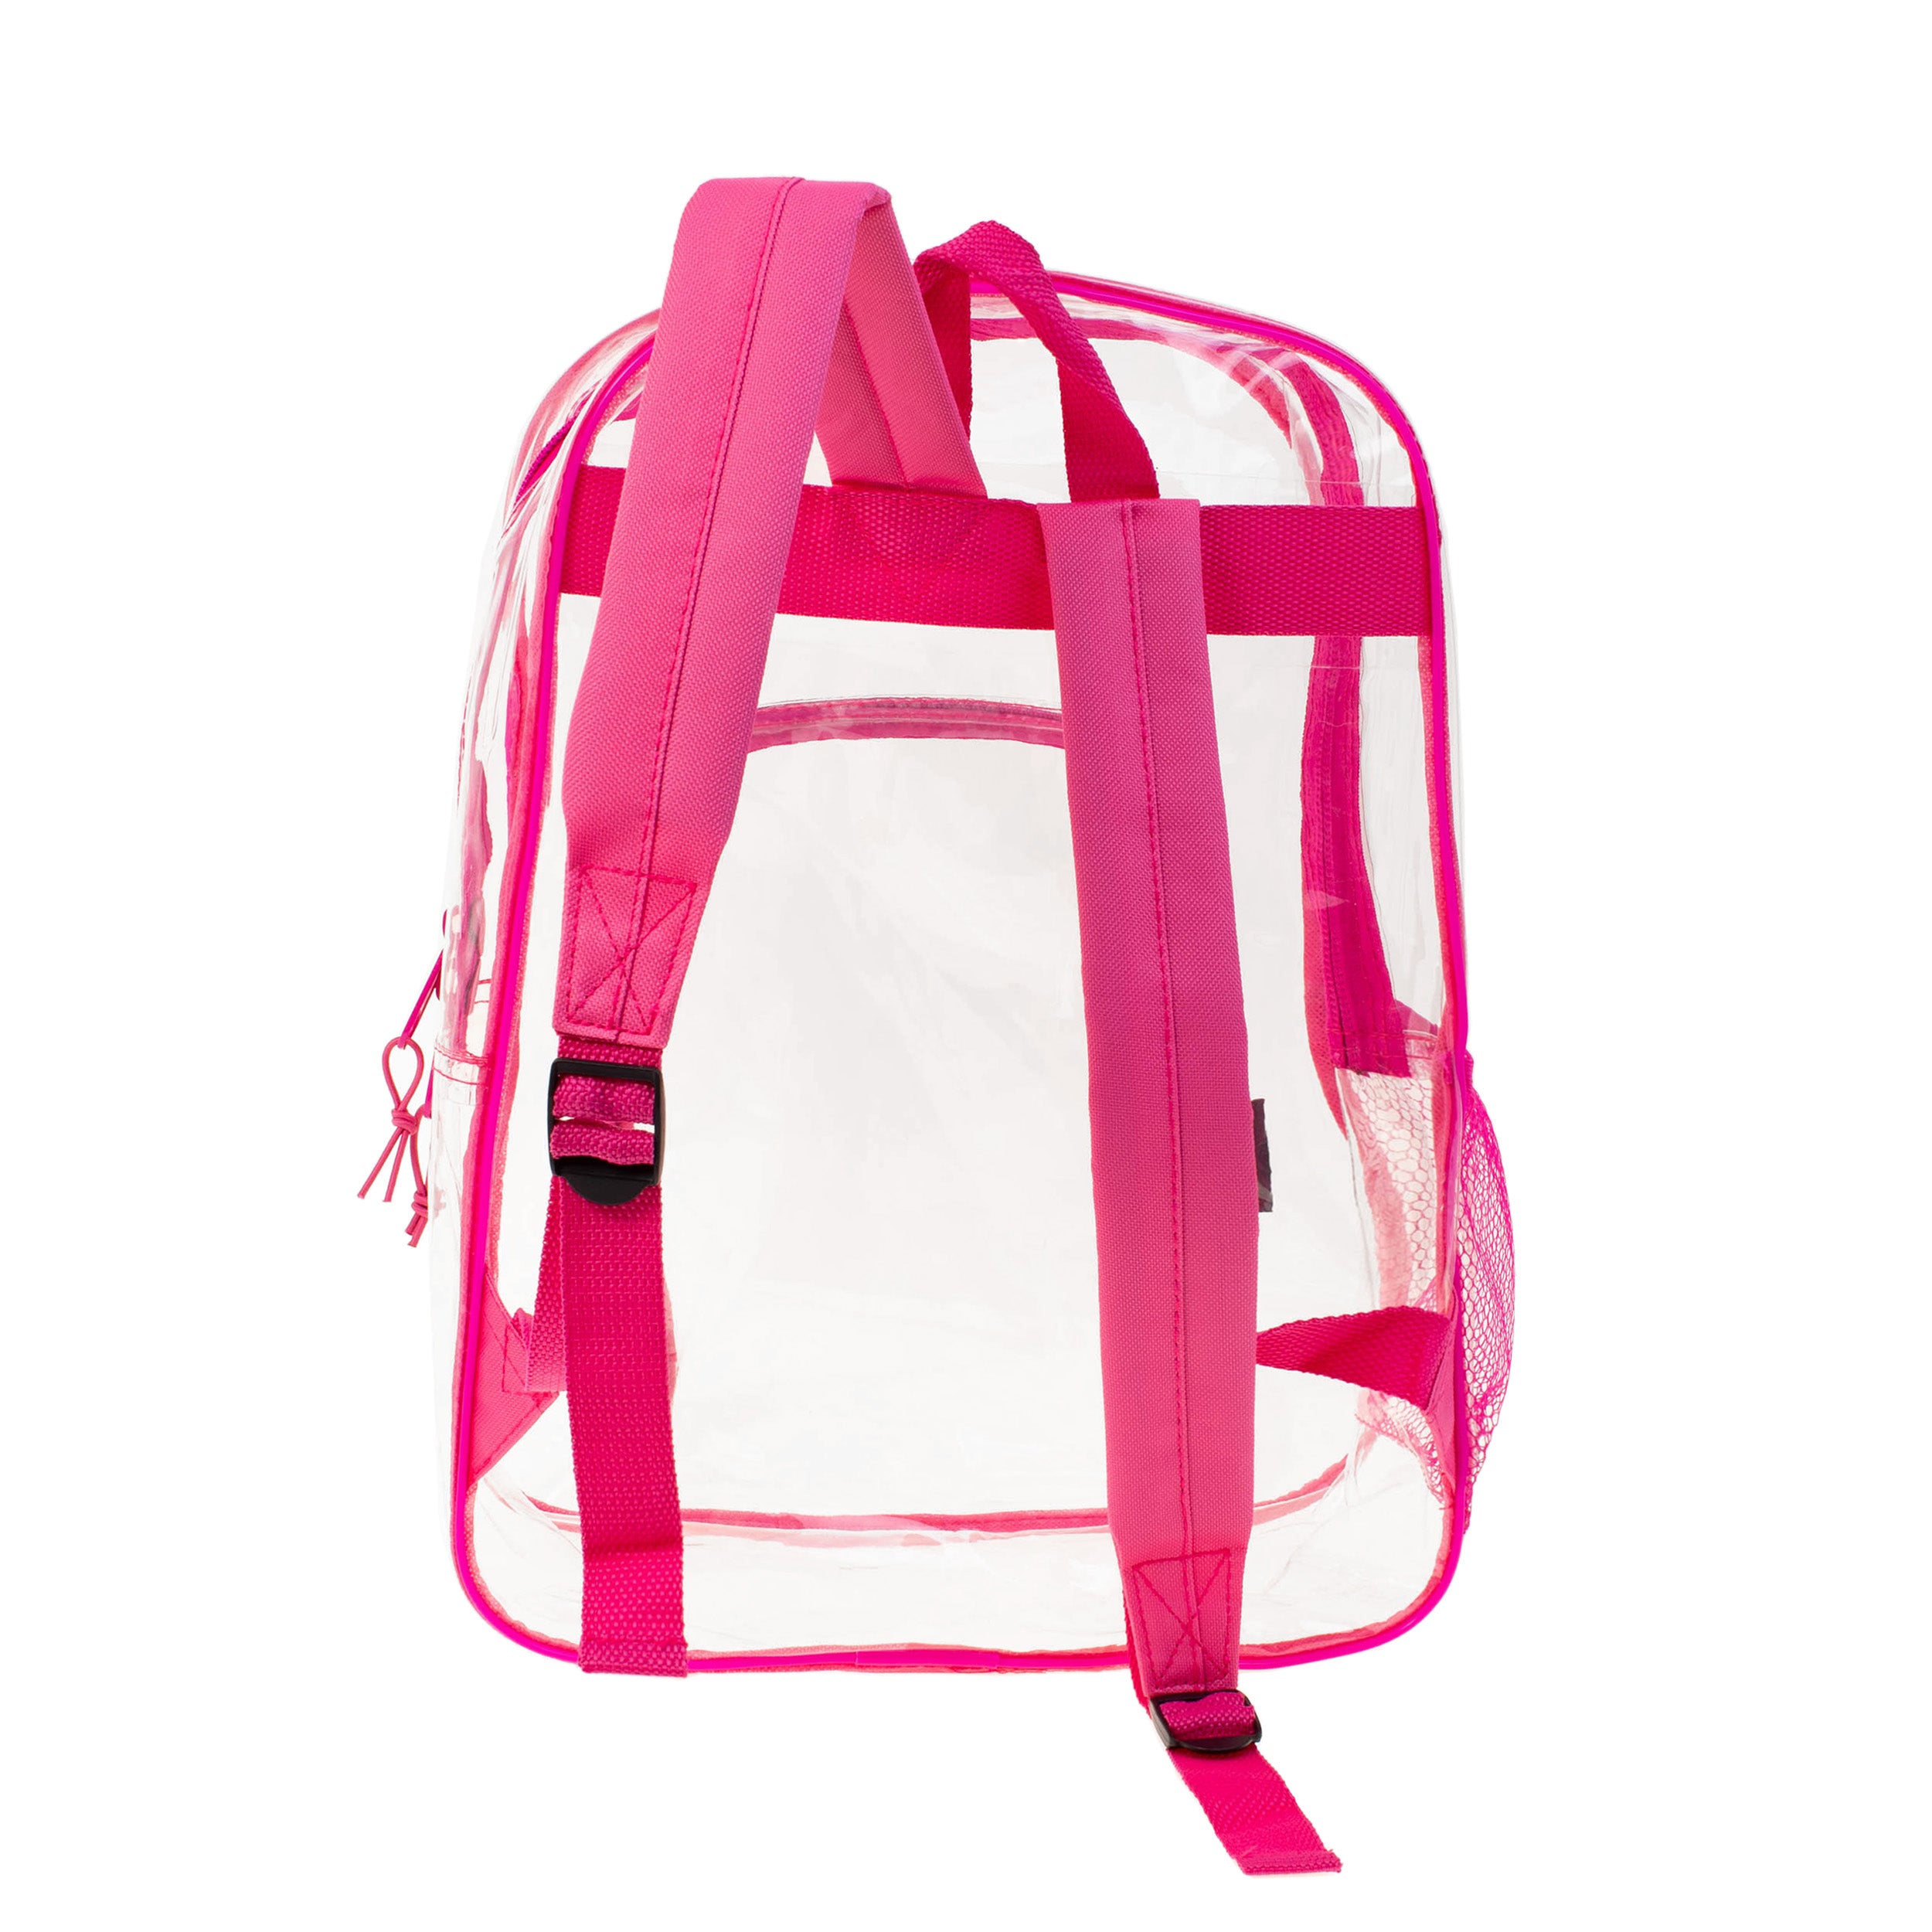 Clear Vinyl Piping Bulk Backpacks in 3 Assorted Colors- Wholesale Case of 24 Bookbags